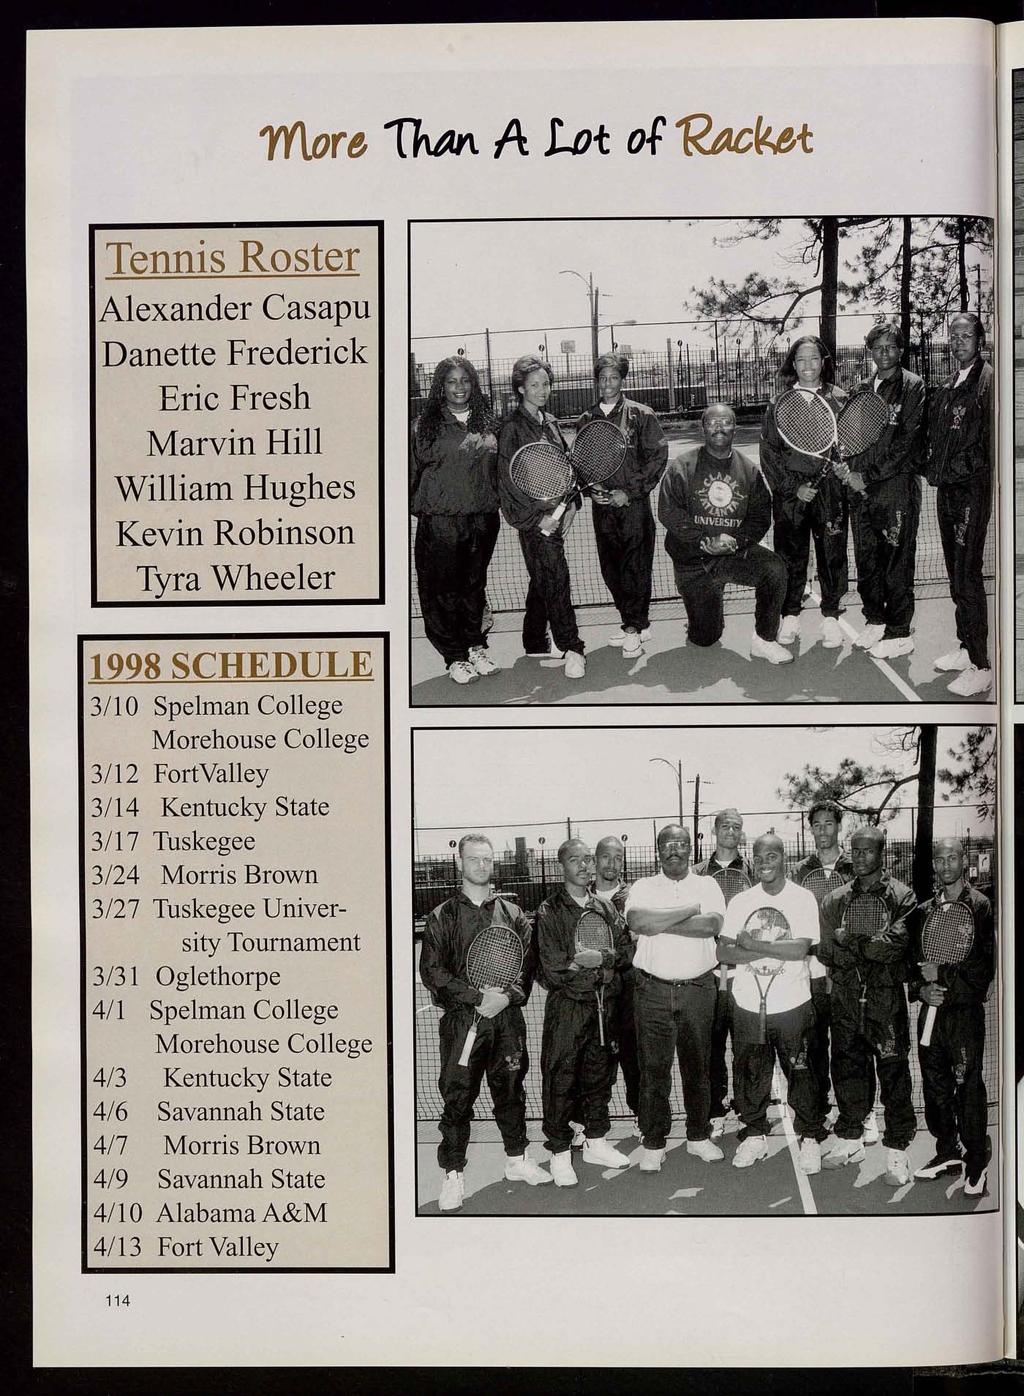 more ThM A lot of 1<Acket Tennis Roster Alexander Casapu Danette Frederick Eric Fresh Marvin Hill William Hughes Kevin Robinson Tyra Wheeler 1998 SCHEDULE 3/10 Spelman College Morehouse College 3/12